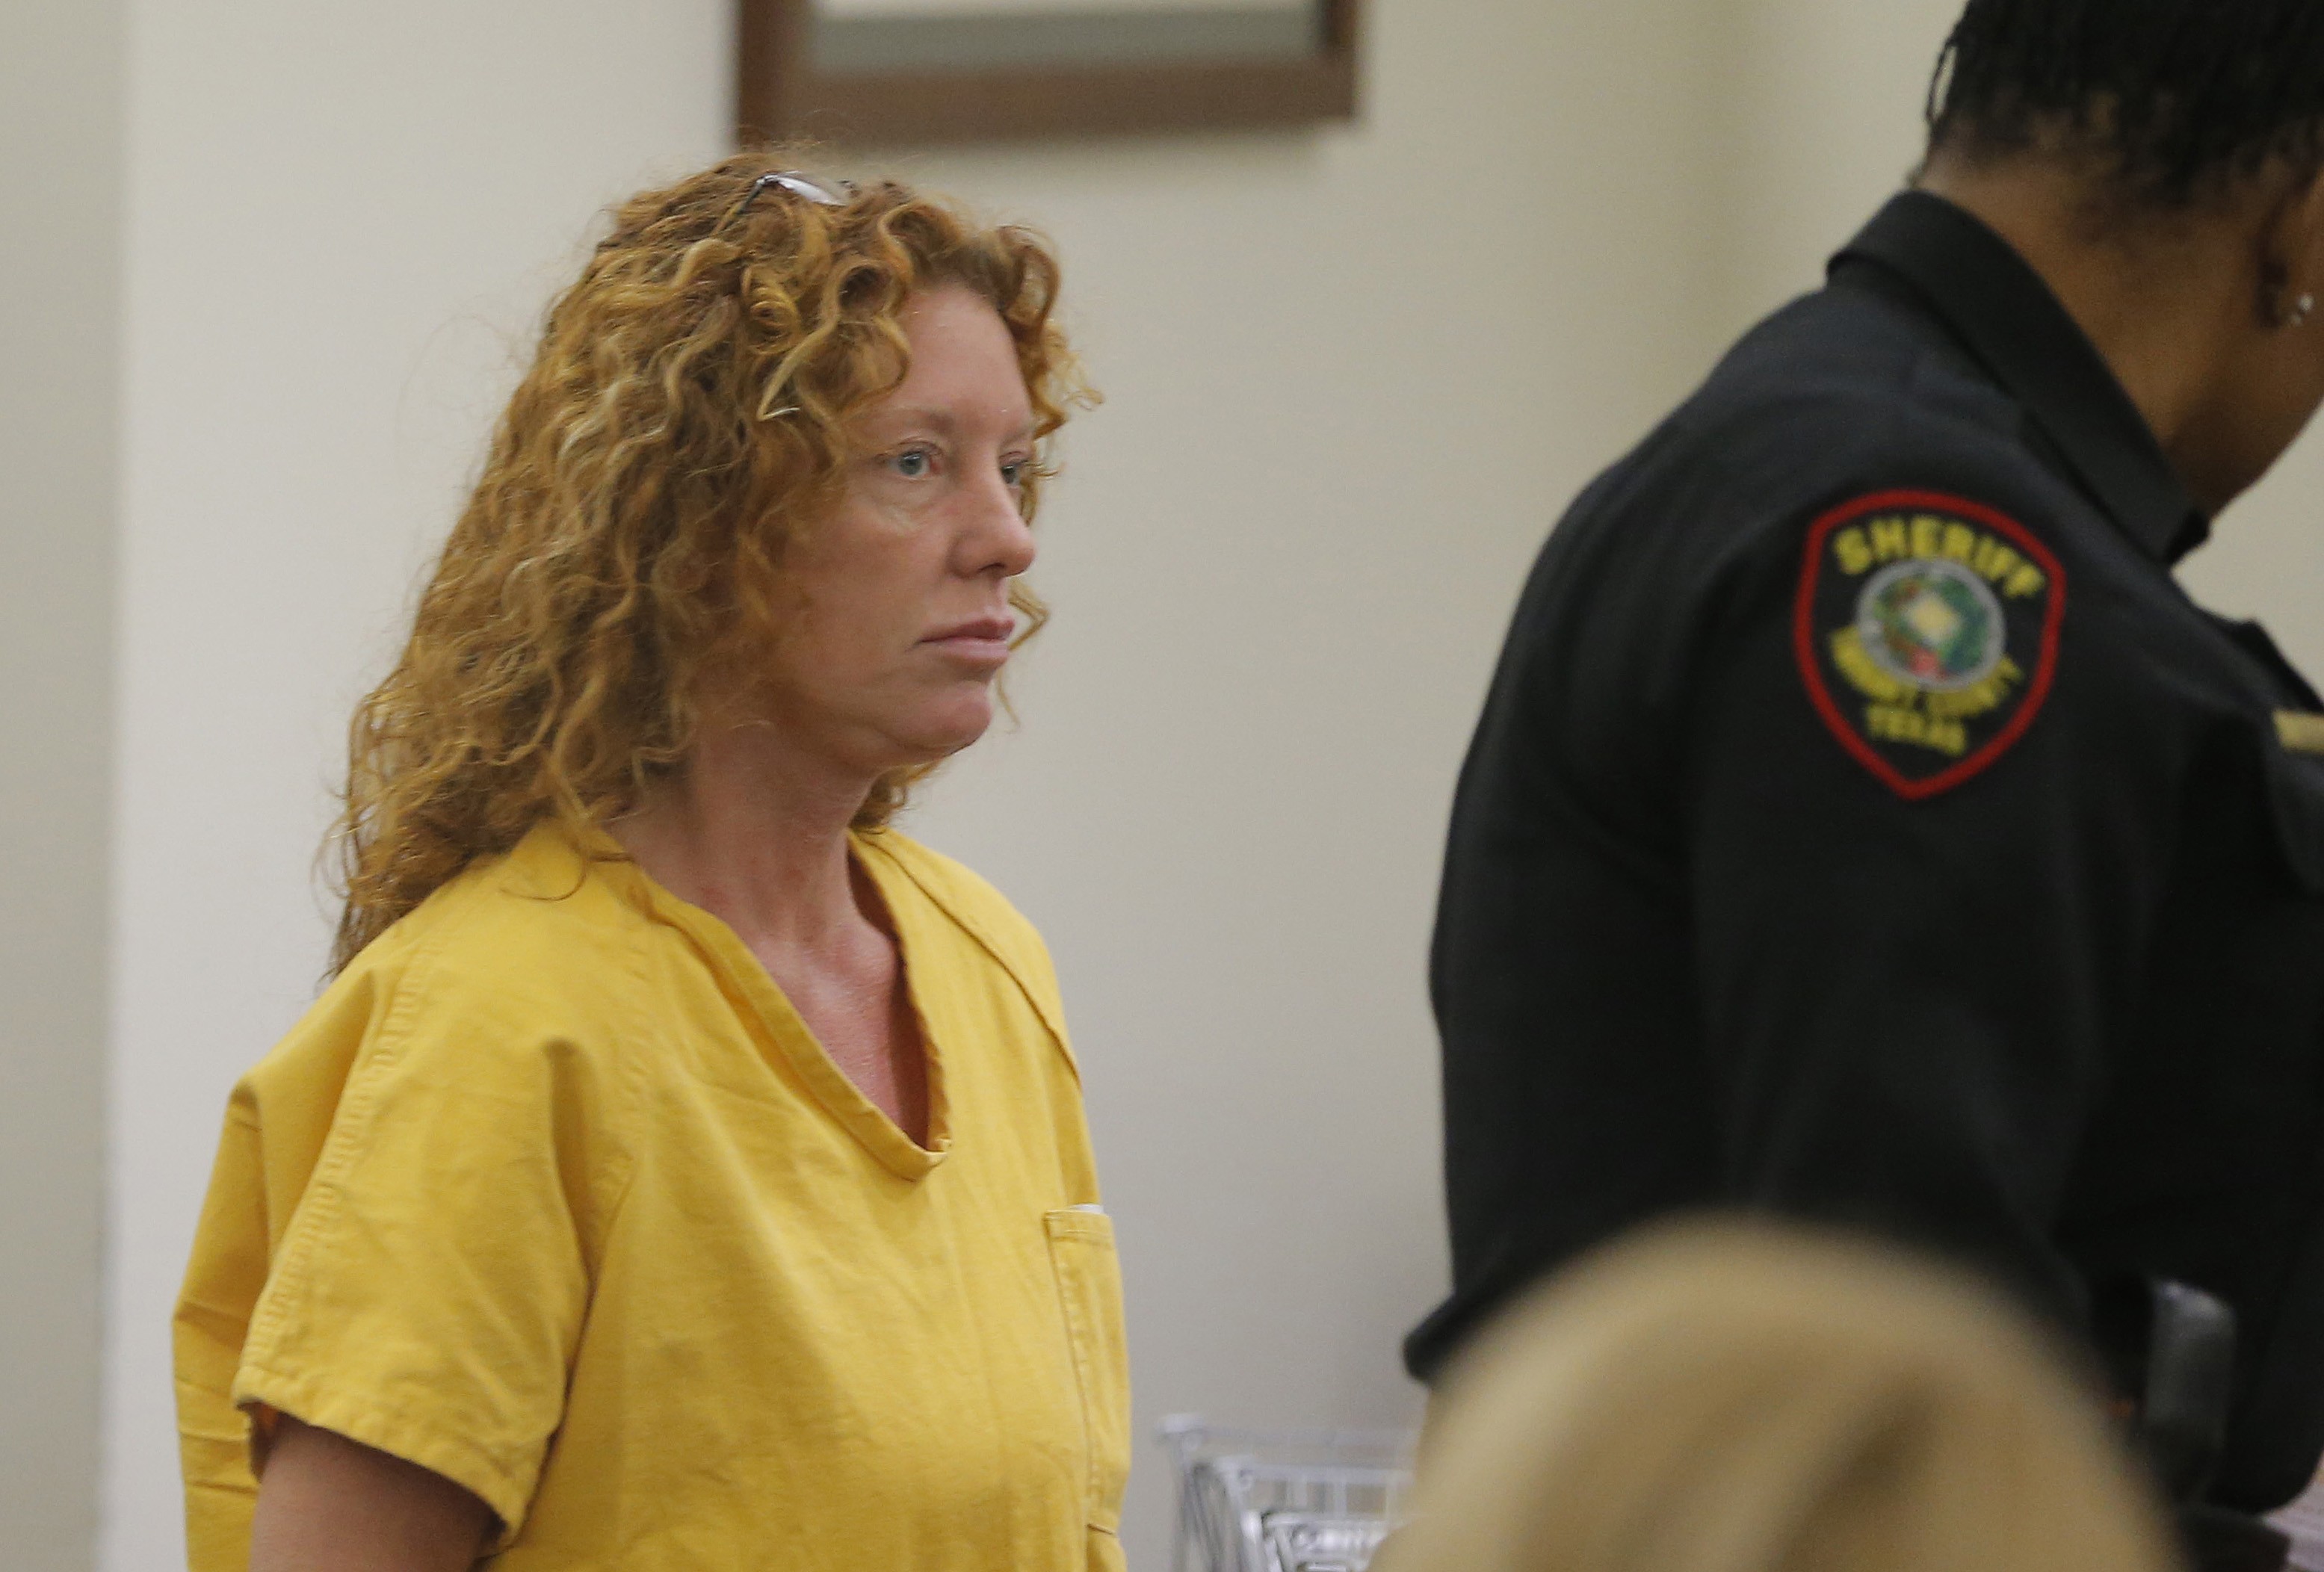 Warrant "Affluenza" teen's mom took 30,000 before fleeing to Mexico